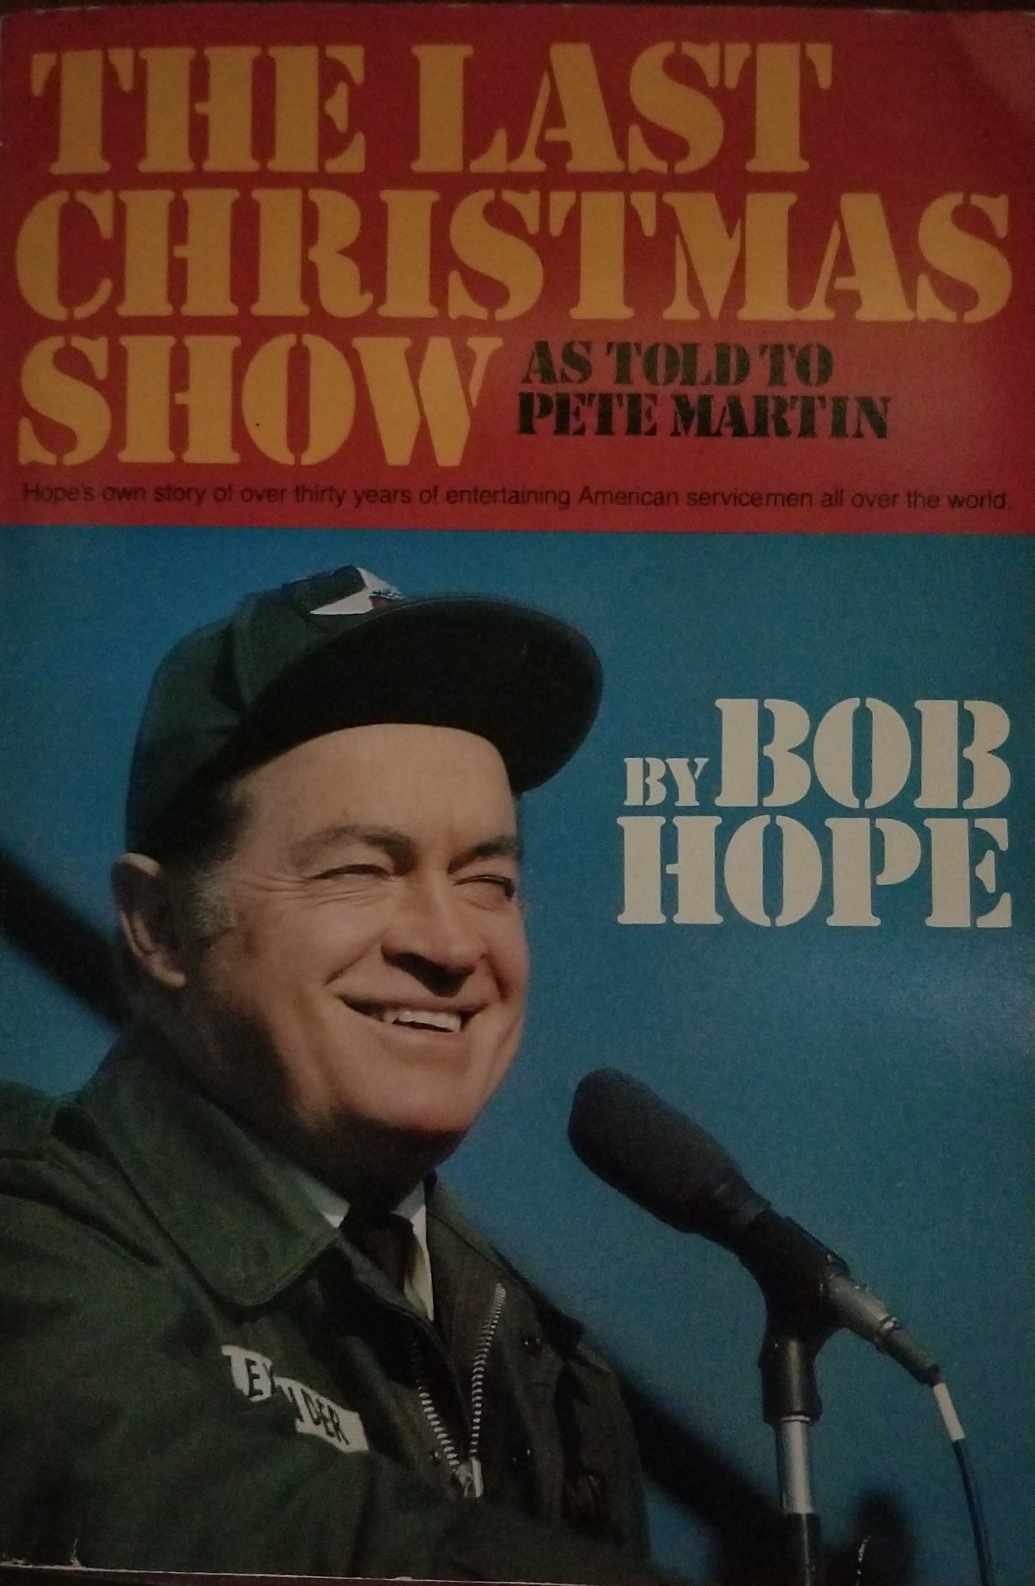 The Last Christmas Show by Bob Hope, Peter Martin